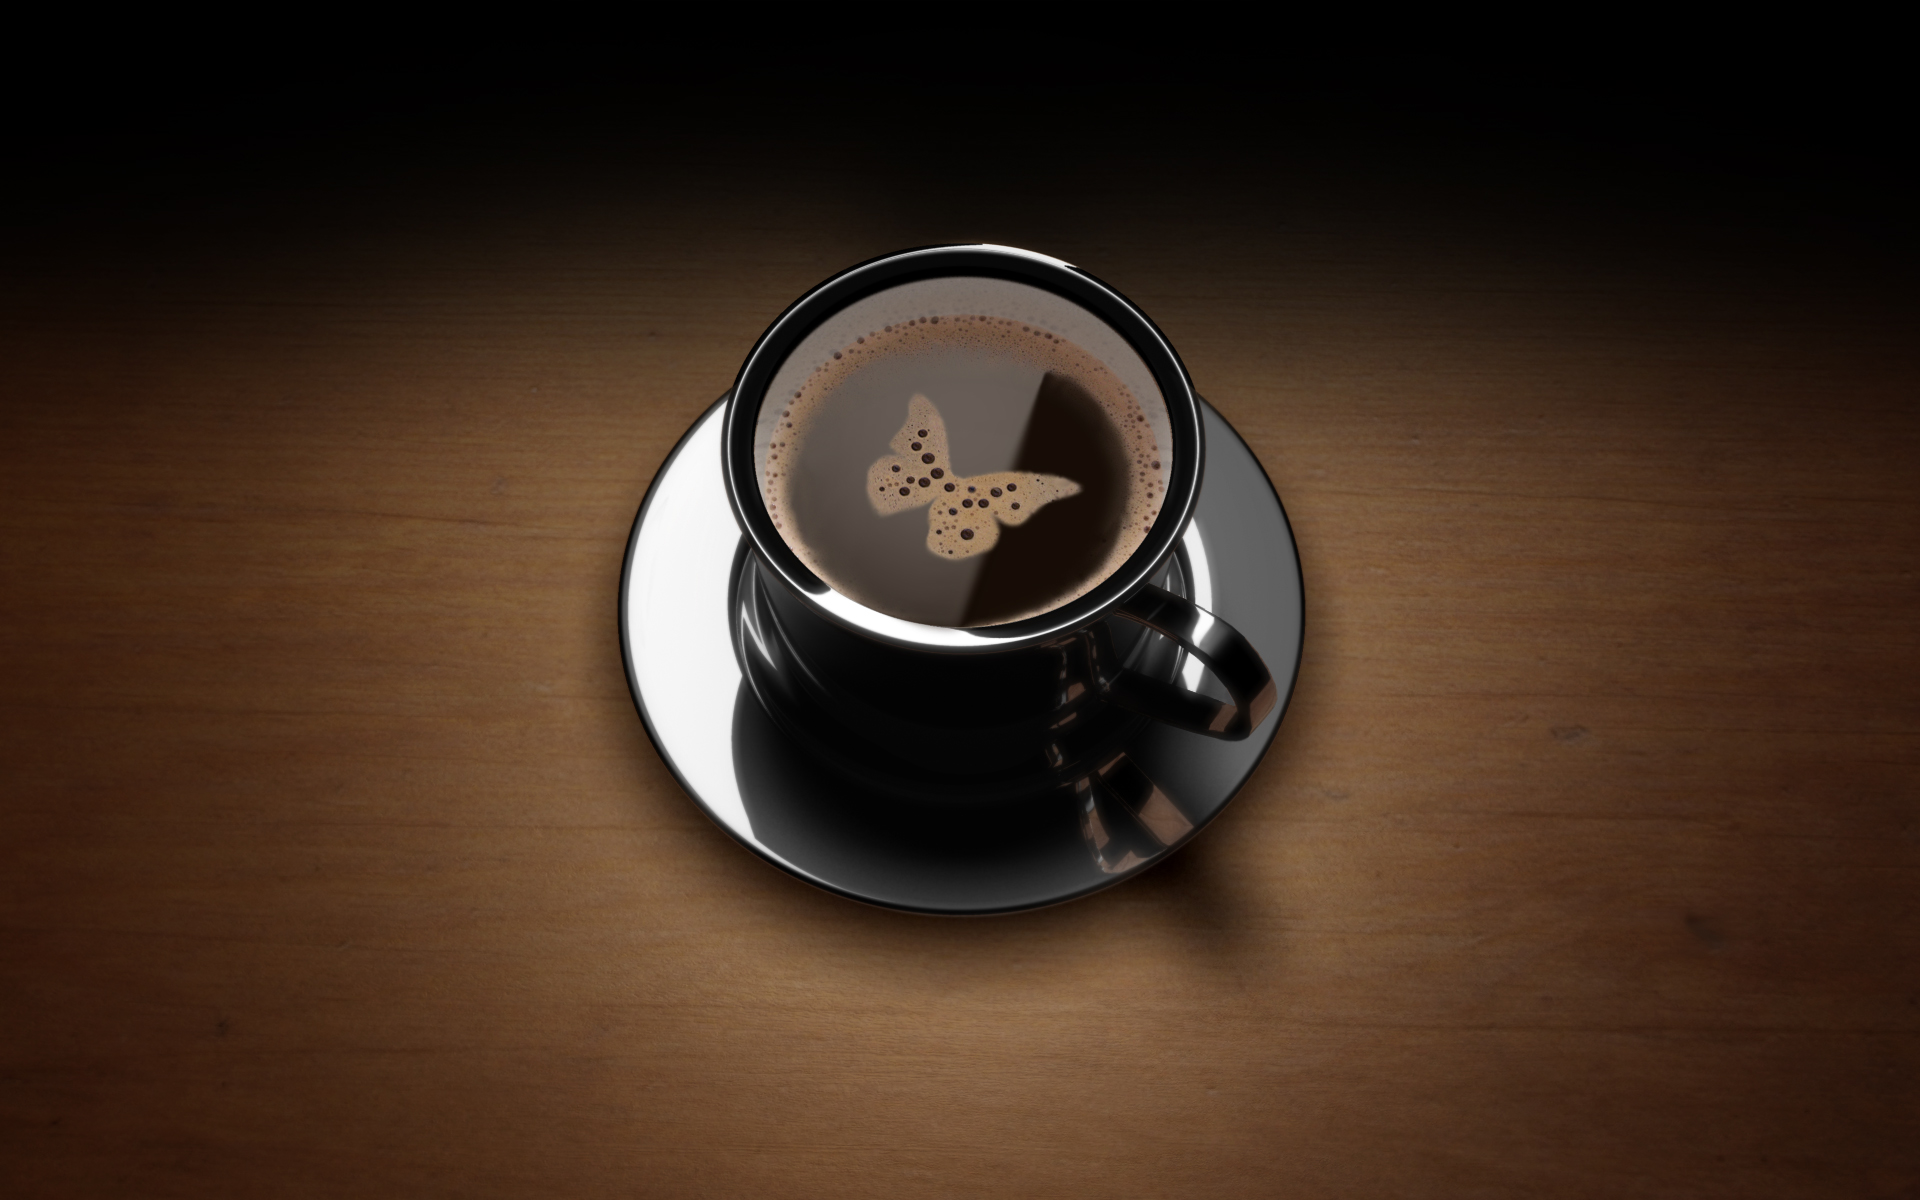 food, butterfly, cup, coffee lock screen backgrounds